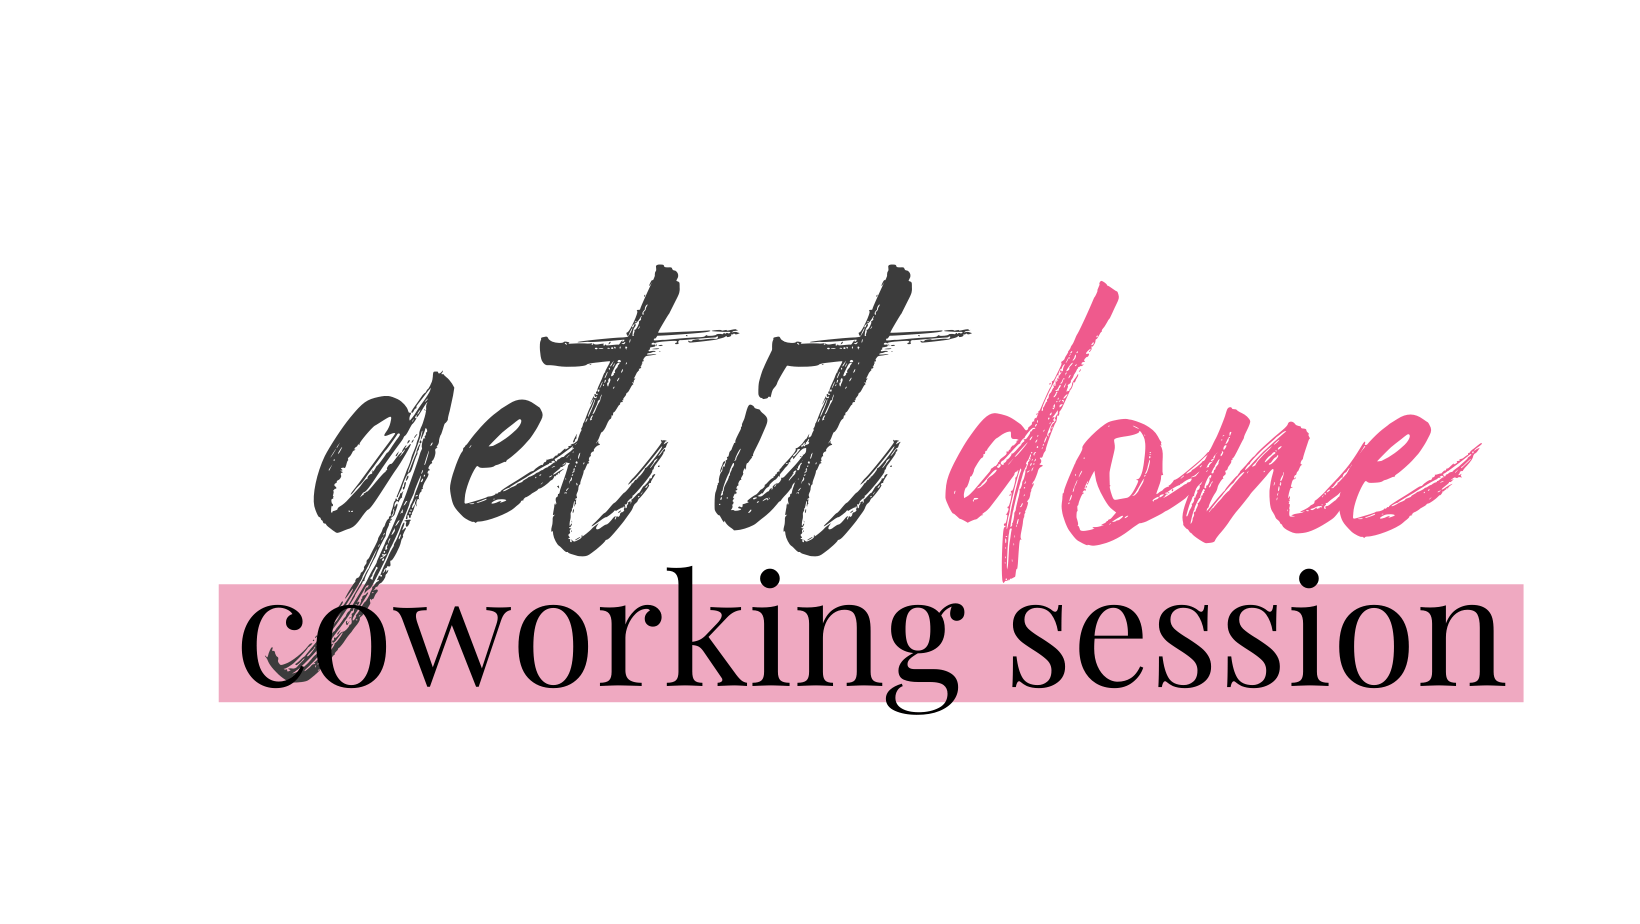 Get it Done coworking session